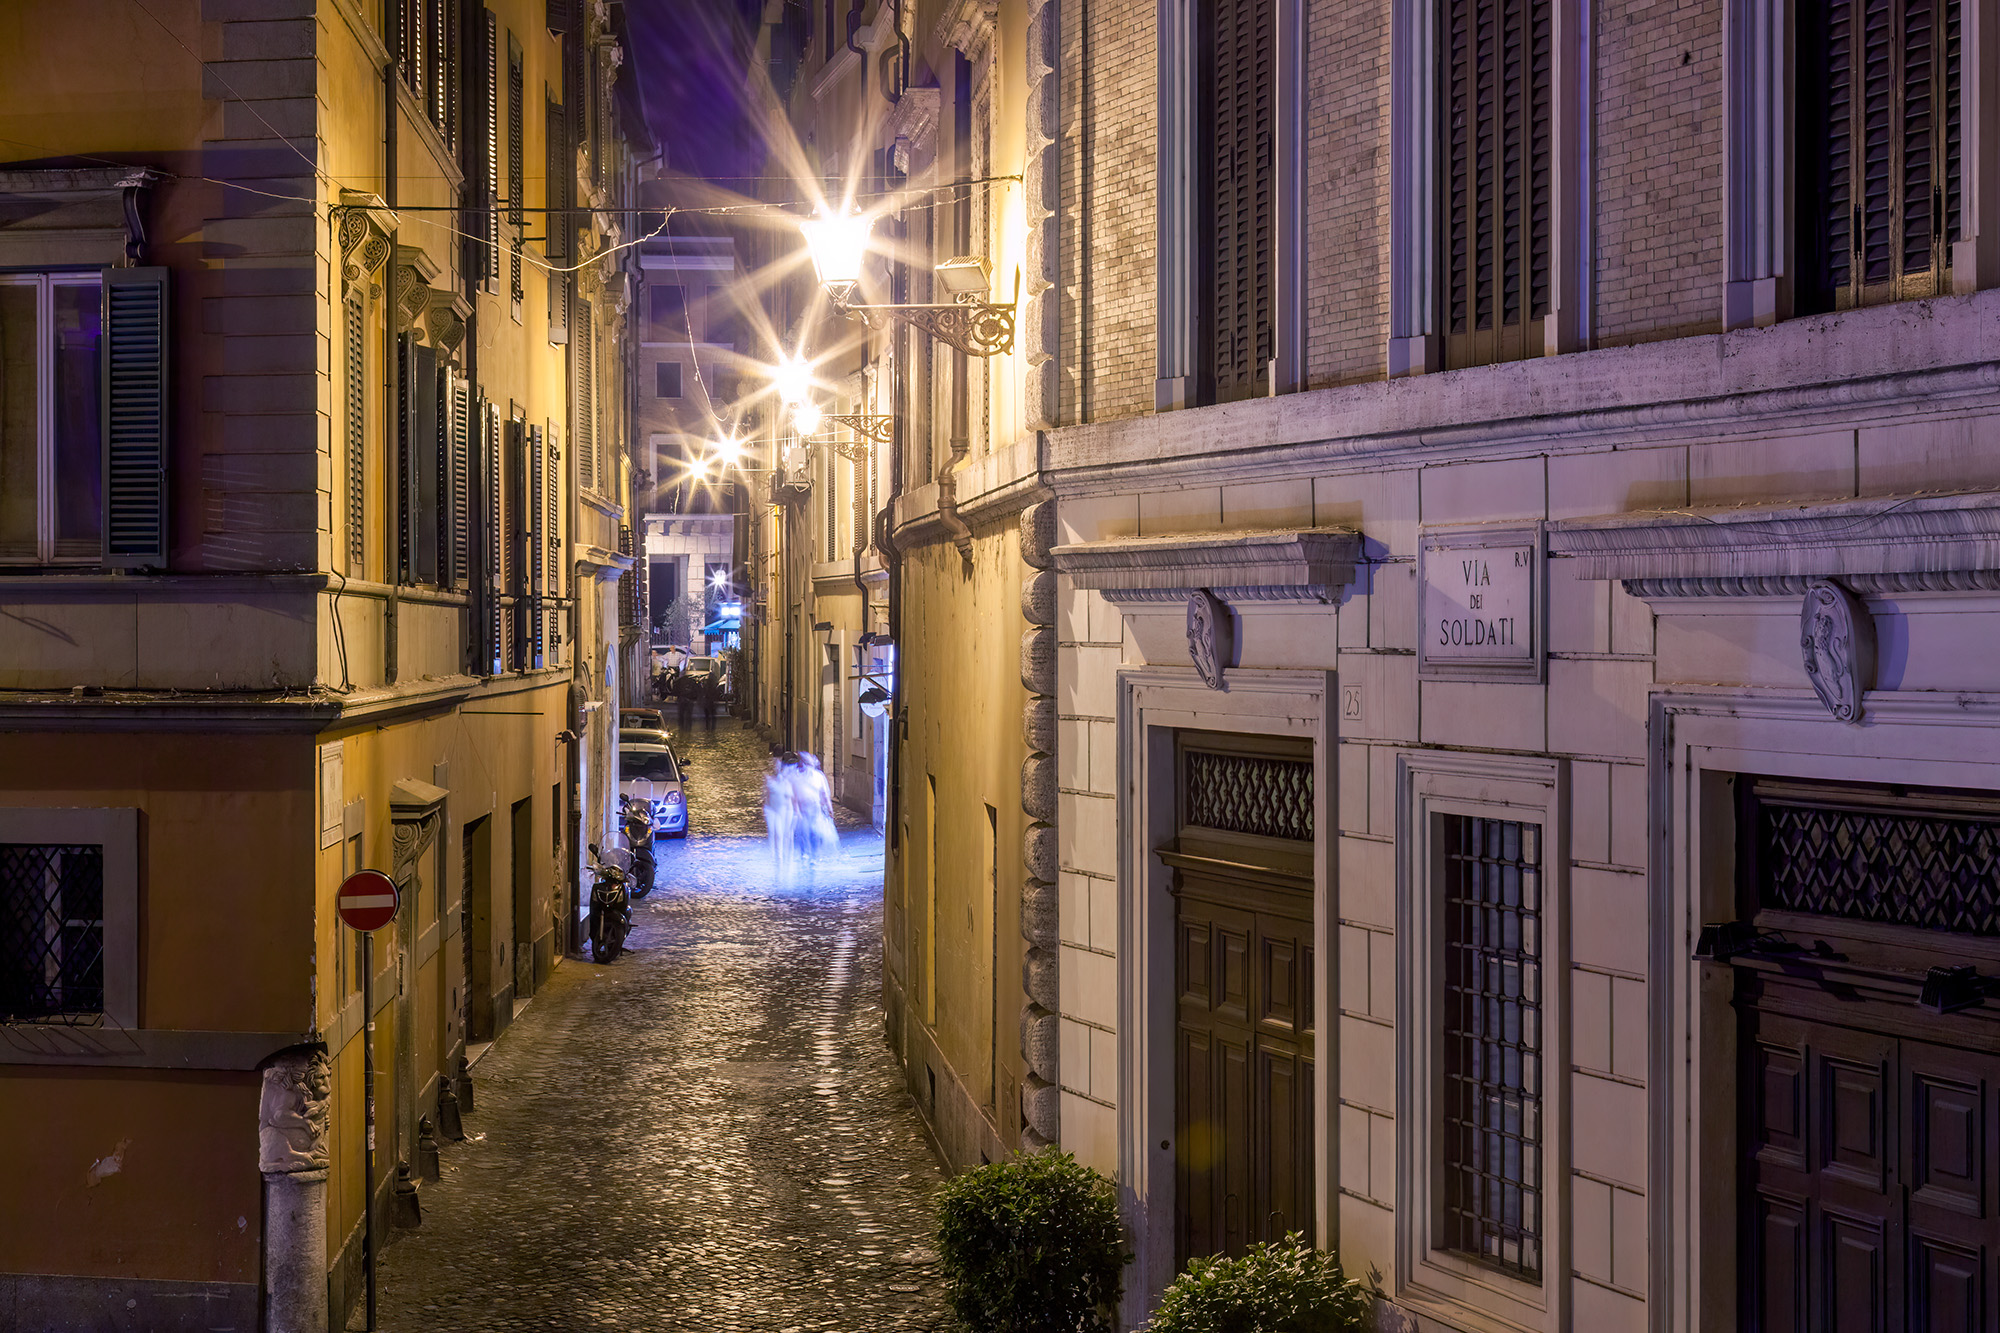 This nighttime image of Via de Soldati in Rome, Italy, paints a scene of charm and romance. A cobbled street stretches ahead...